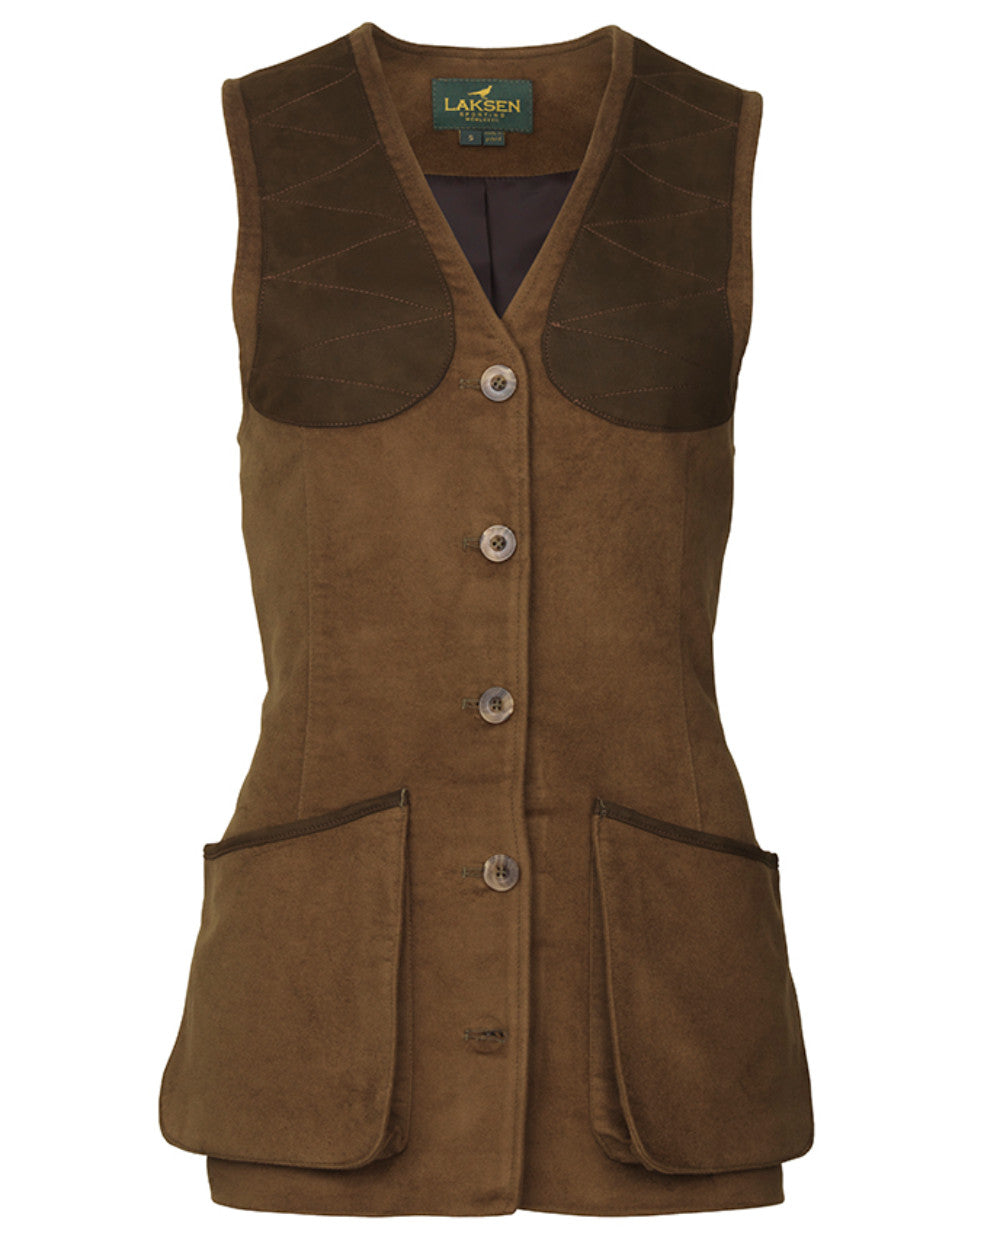 Bronze Coloured Laksen Lady Belgravia Beauly Shooting Vest On A White Background 